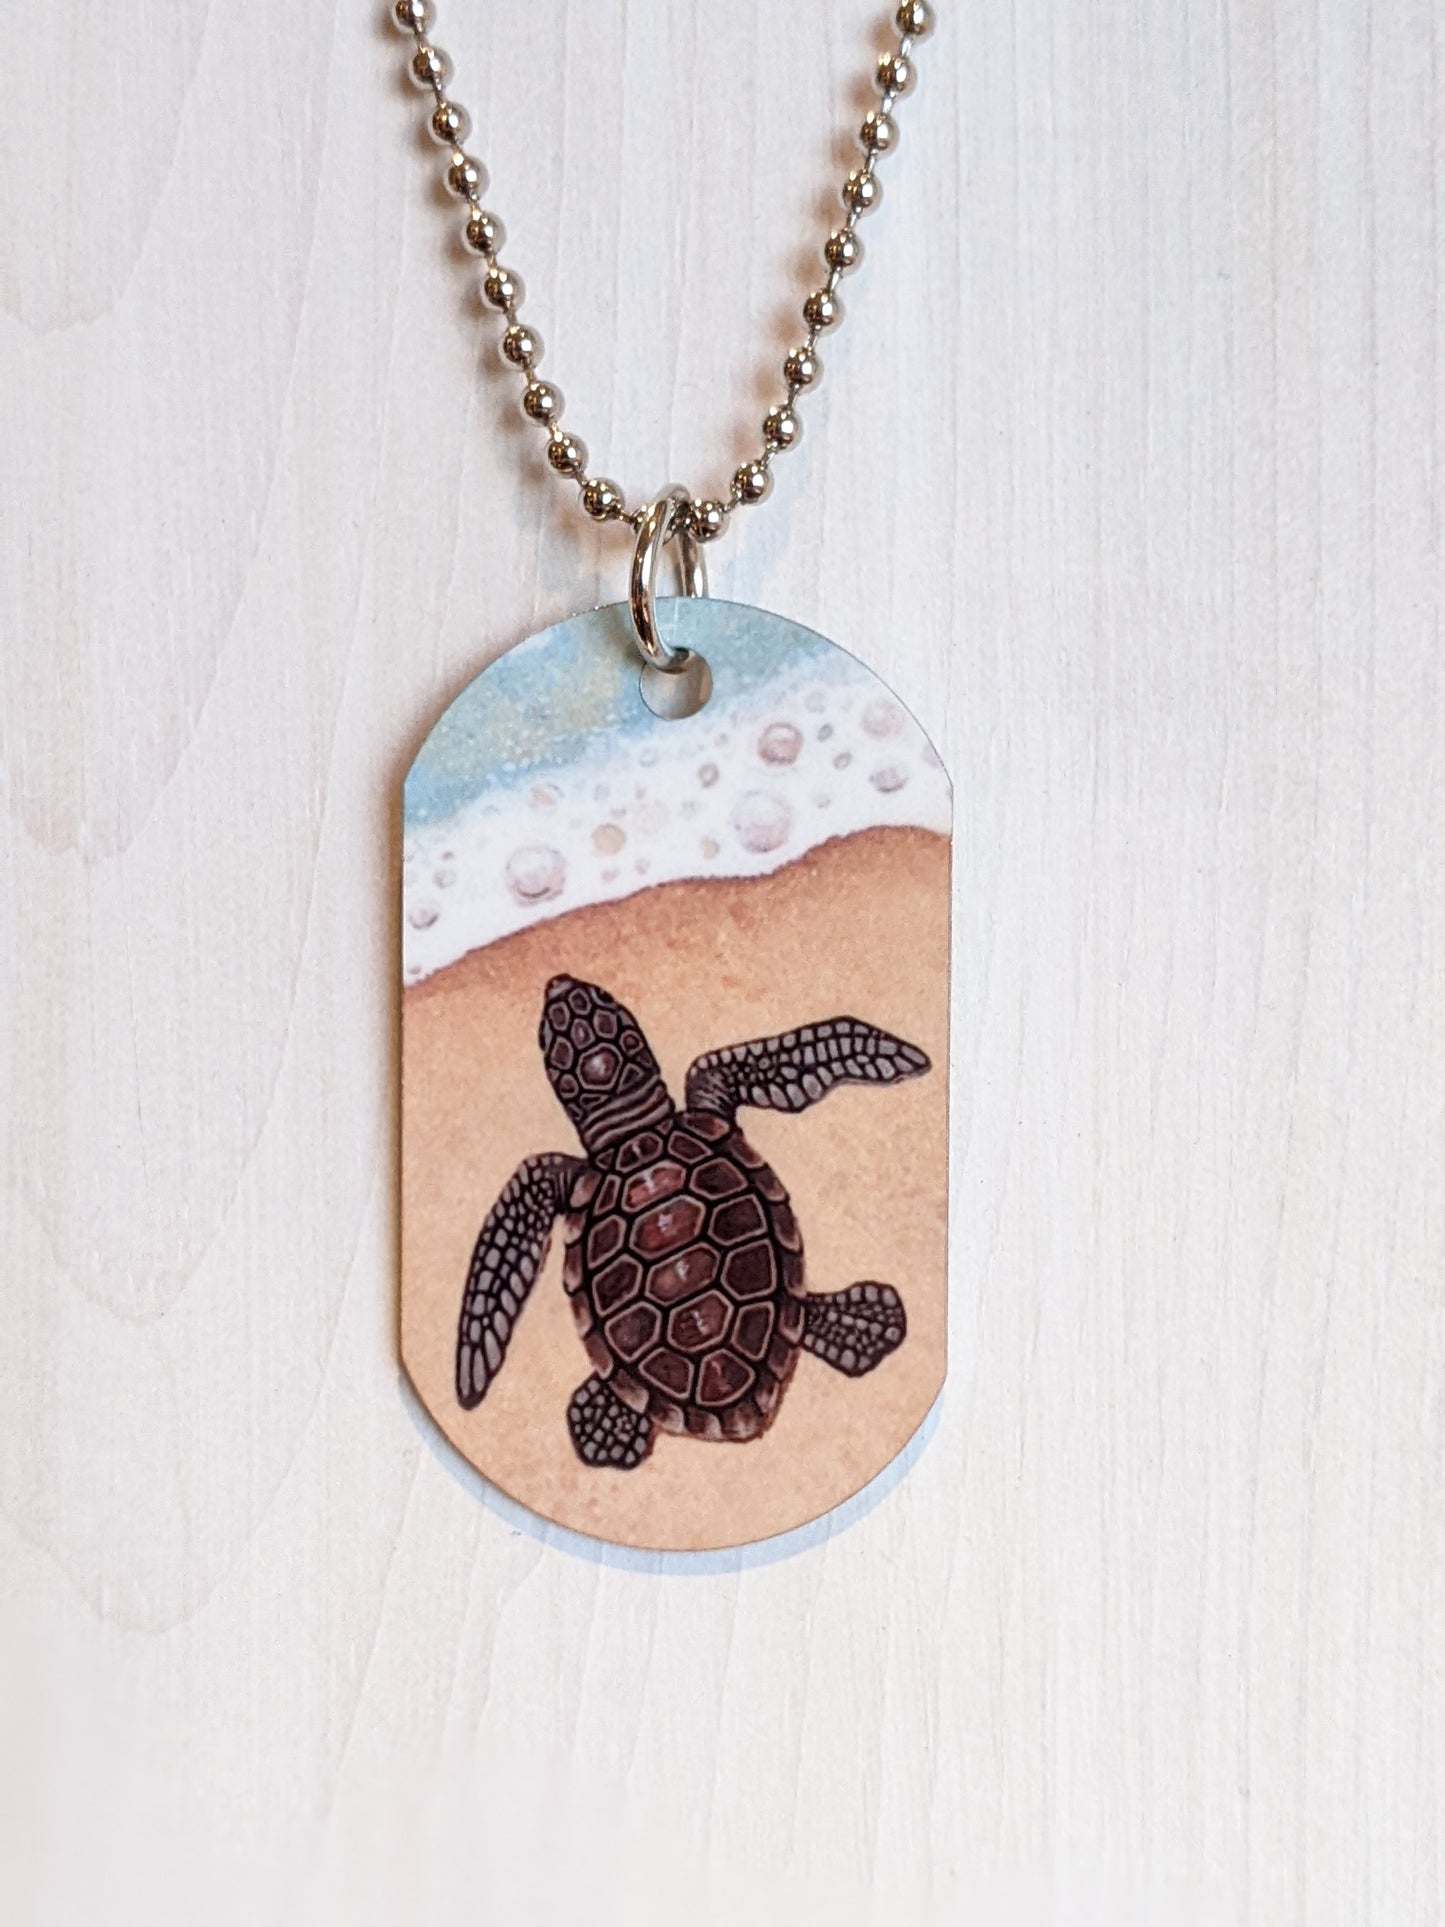 Baby Sea Turtle Necklace Metal Dog Tag with Chain